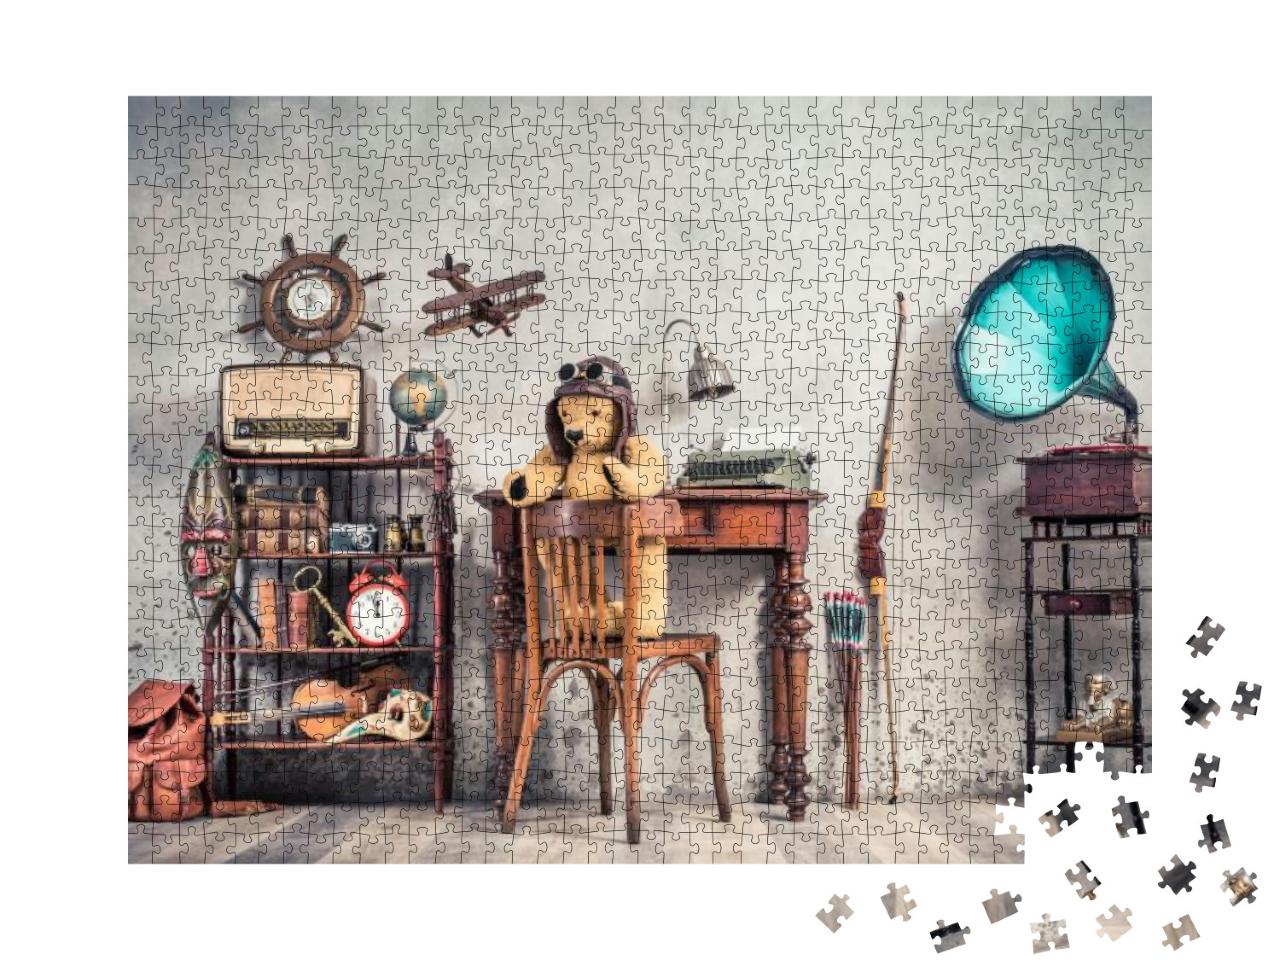 Teddy Bear Toy on Chair, Typewriter, Vintage Gramophone... Jigsaw Puzzle with 1000 pieces